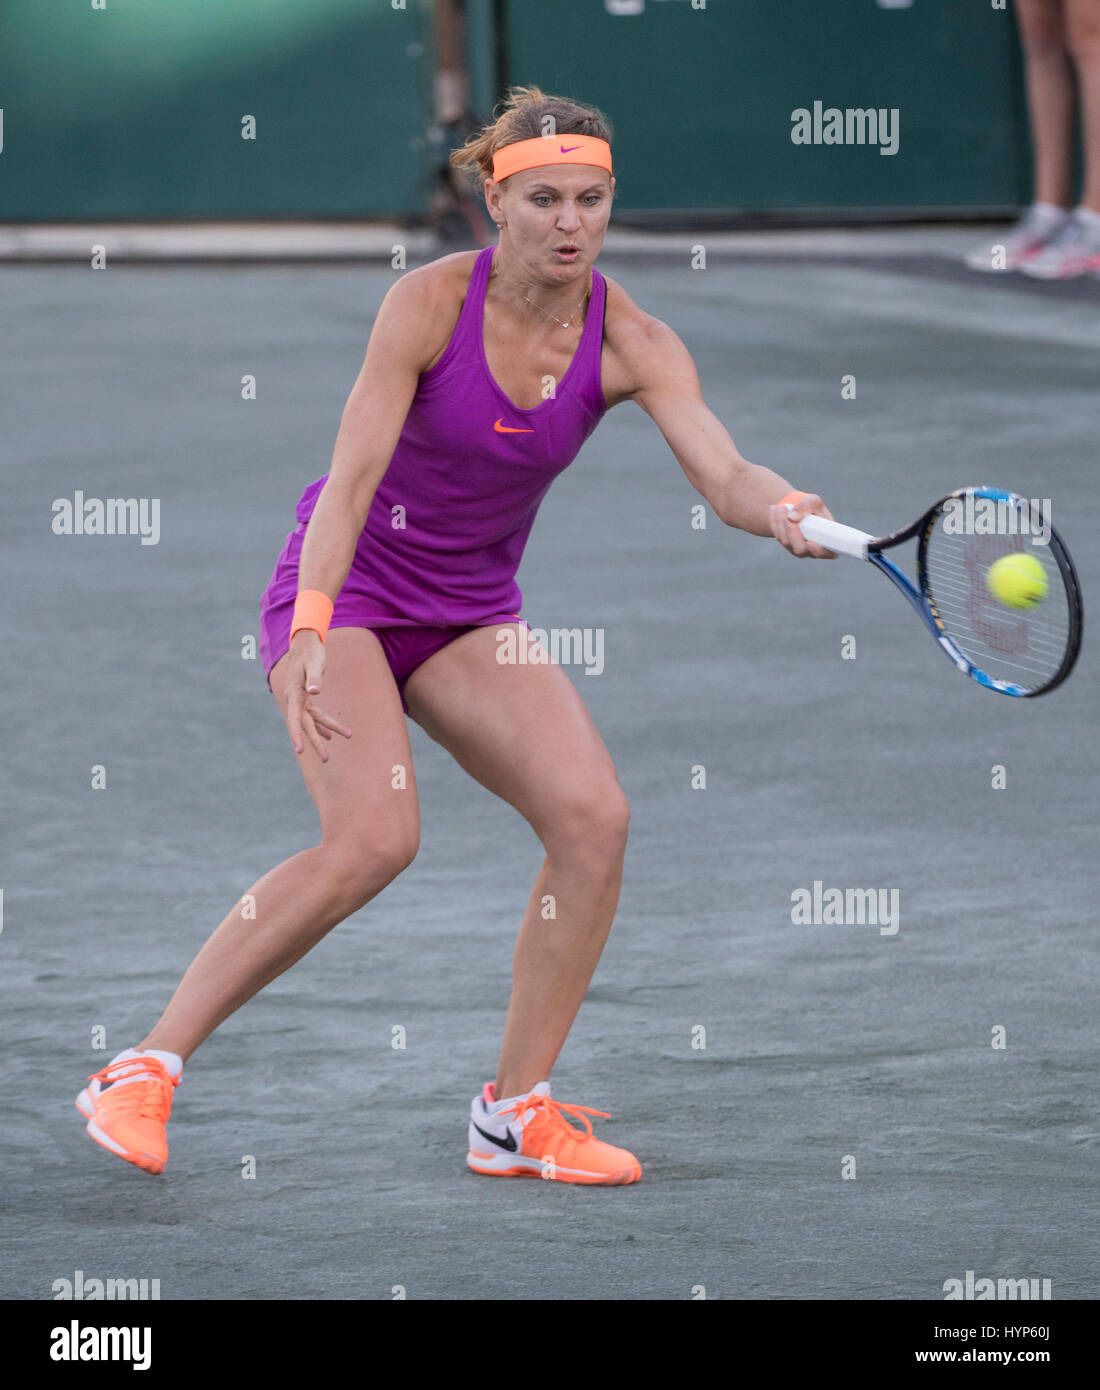 Charleston, South Carolina, USA. 6th Apr, 2017. Lucie Safarova (CZE) loses to Laura Siegemund (GER) 6-2, 6-3, at the Volvo Car Open being played at Family Circle Tennis Center in Charleston, South Carolina. © Leslie Billman/Tennisclix/Cal Sport Media/Alamy Live News Stock Photo